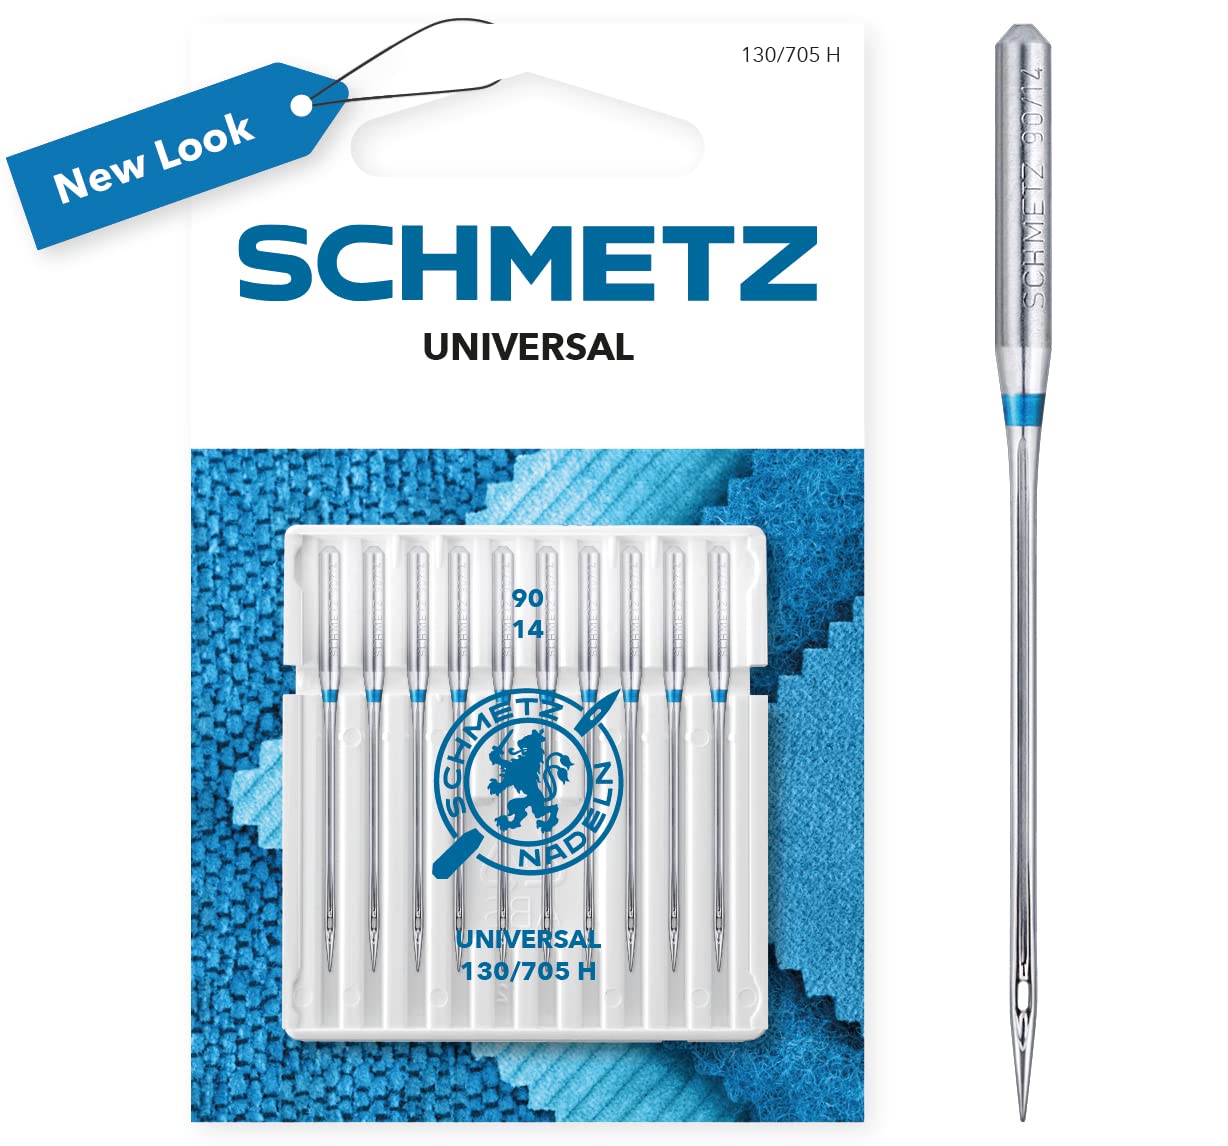 SCHMETZ Domestic Sewing Machine Needles   10 Universal Needles 130/705 H Needle Size 90/14   Suitable for a Wide Range of Fabrics   Can be Used on All Conventional Household Sewing Machines